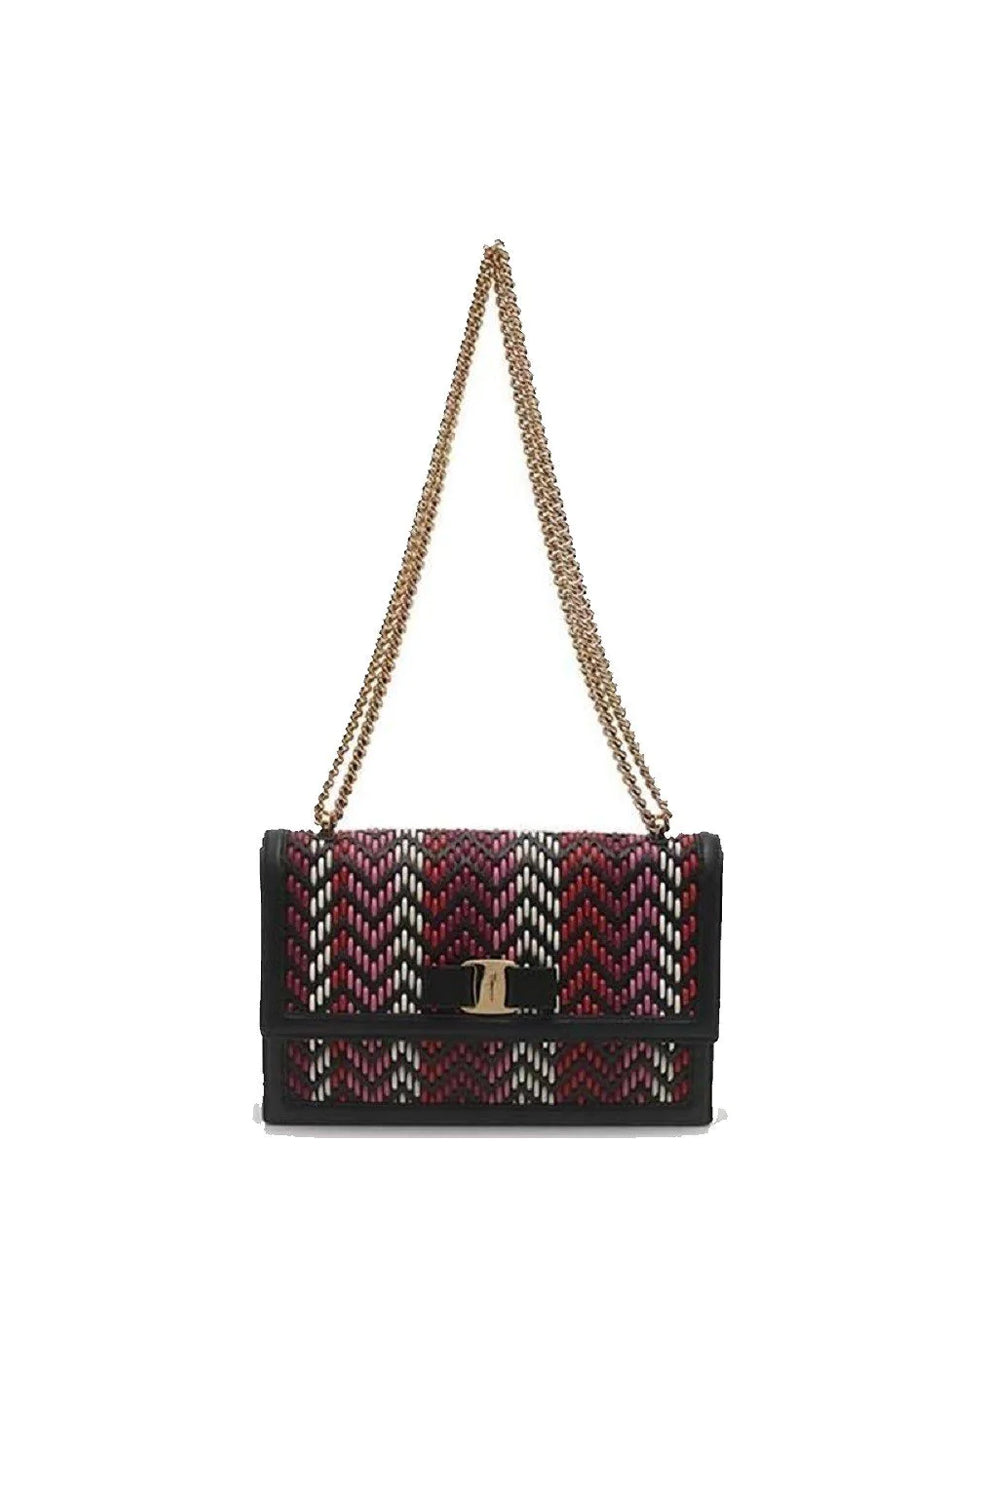 Ferragamo Ginny Multi Pink and Red Plaited Calf Leather Shoulder bag